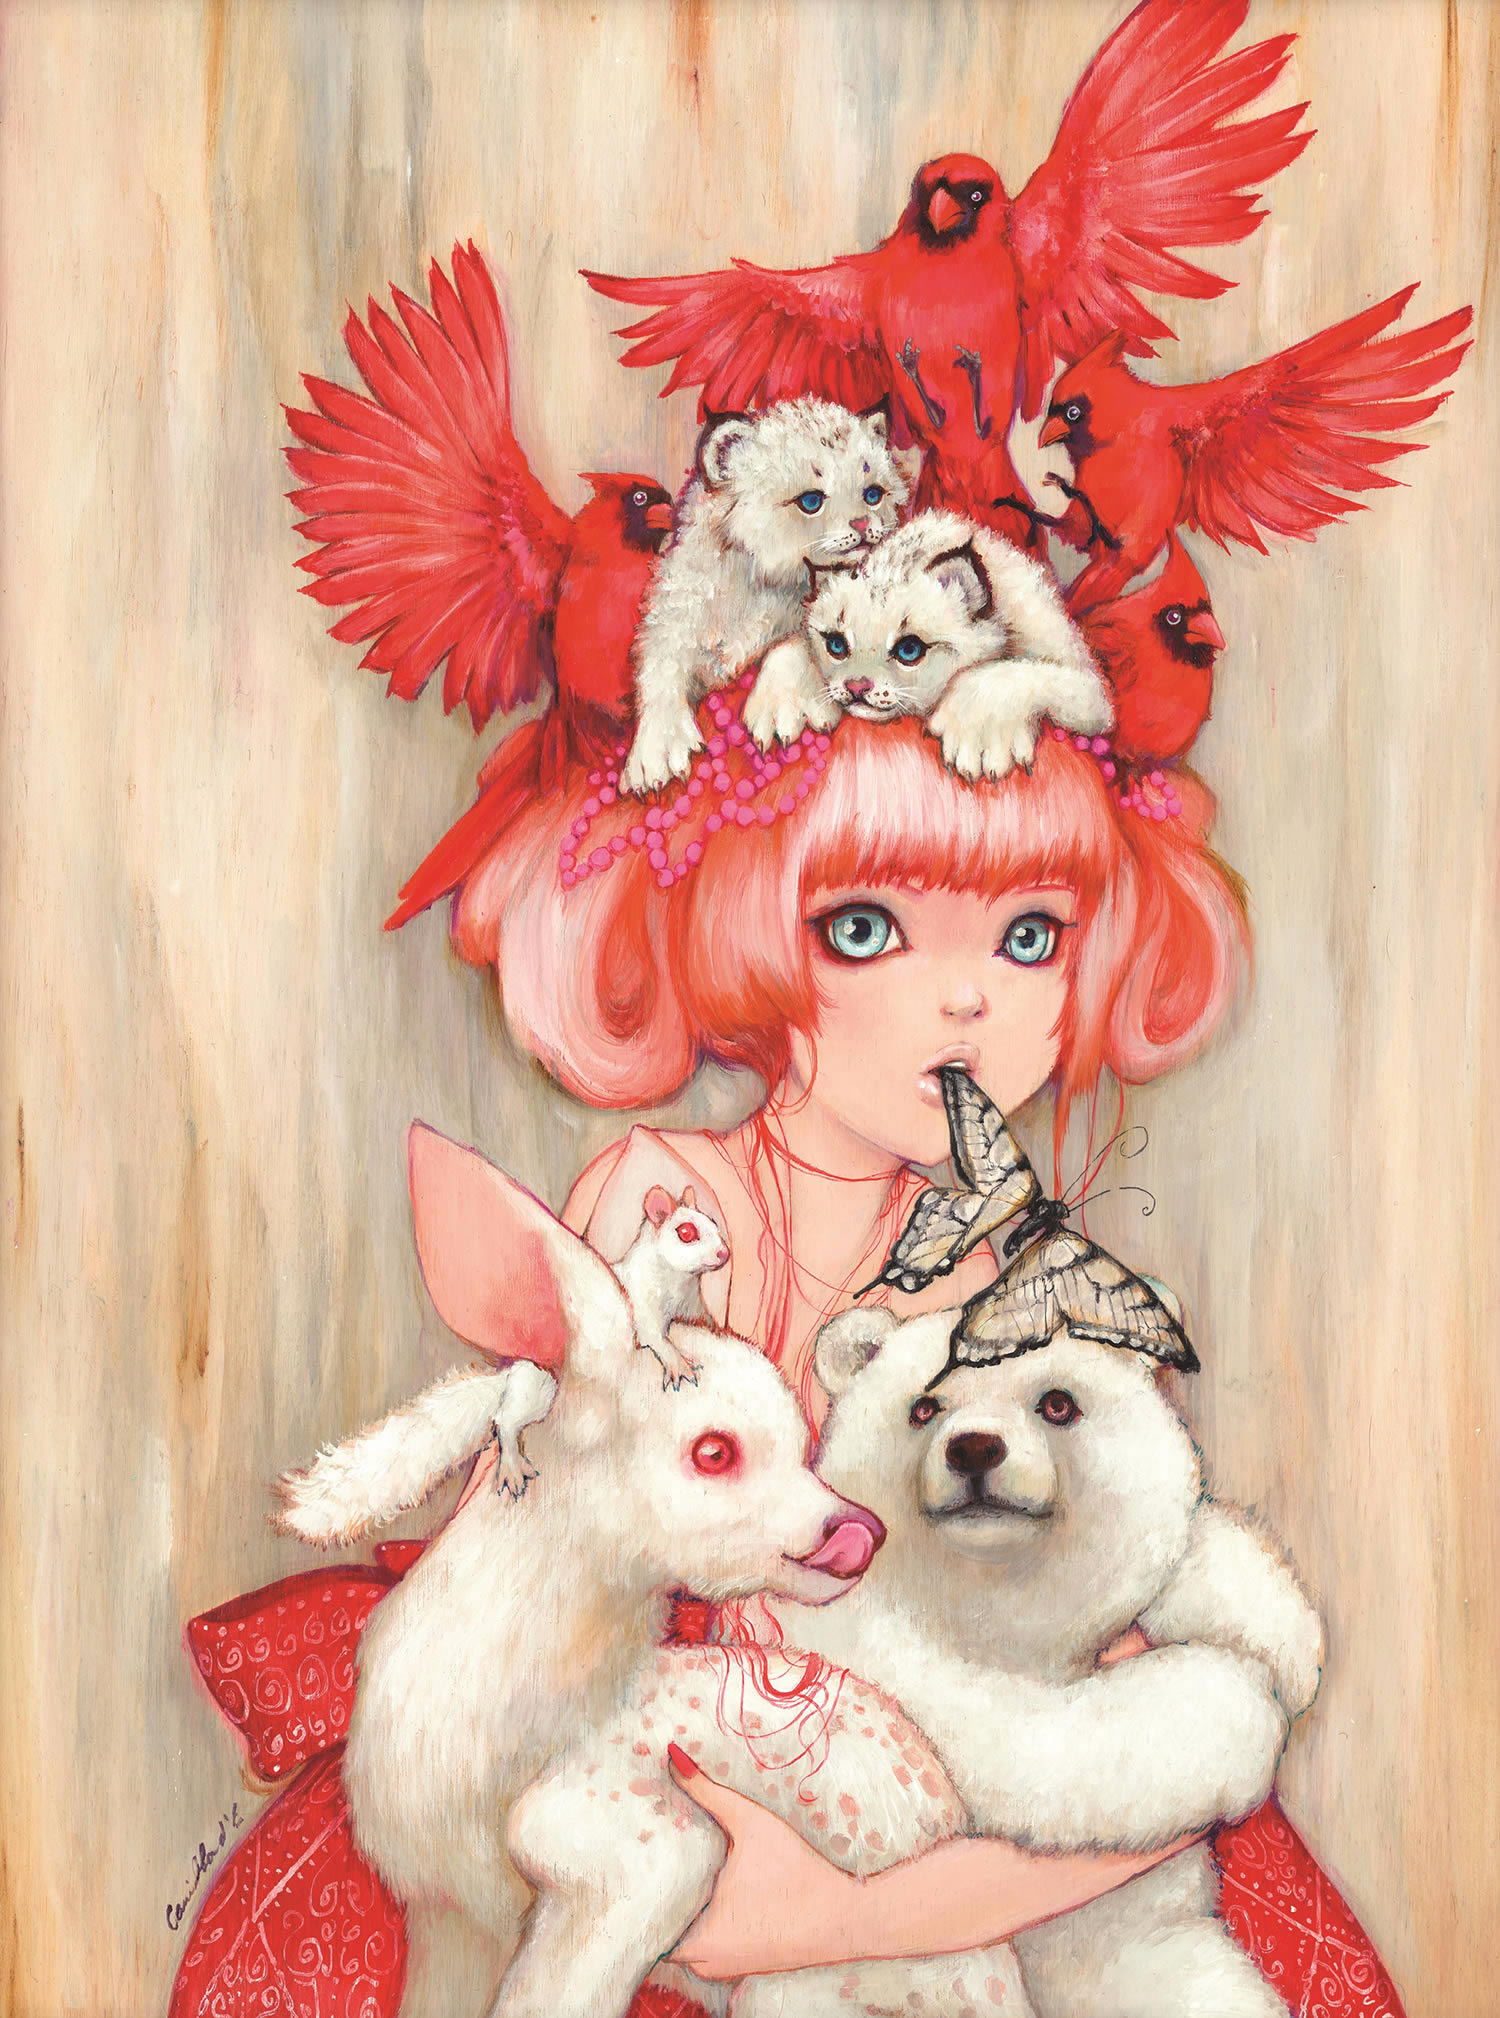 redhead and animals, pop painting by Camilla d’Errico